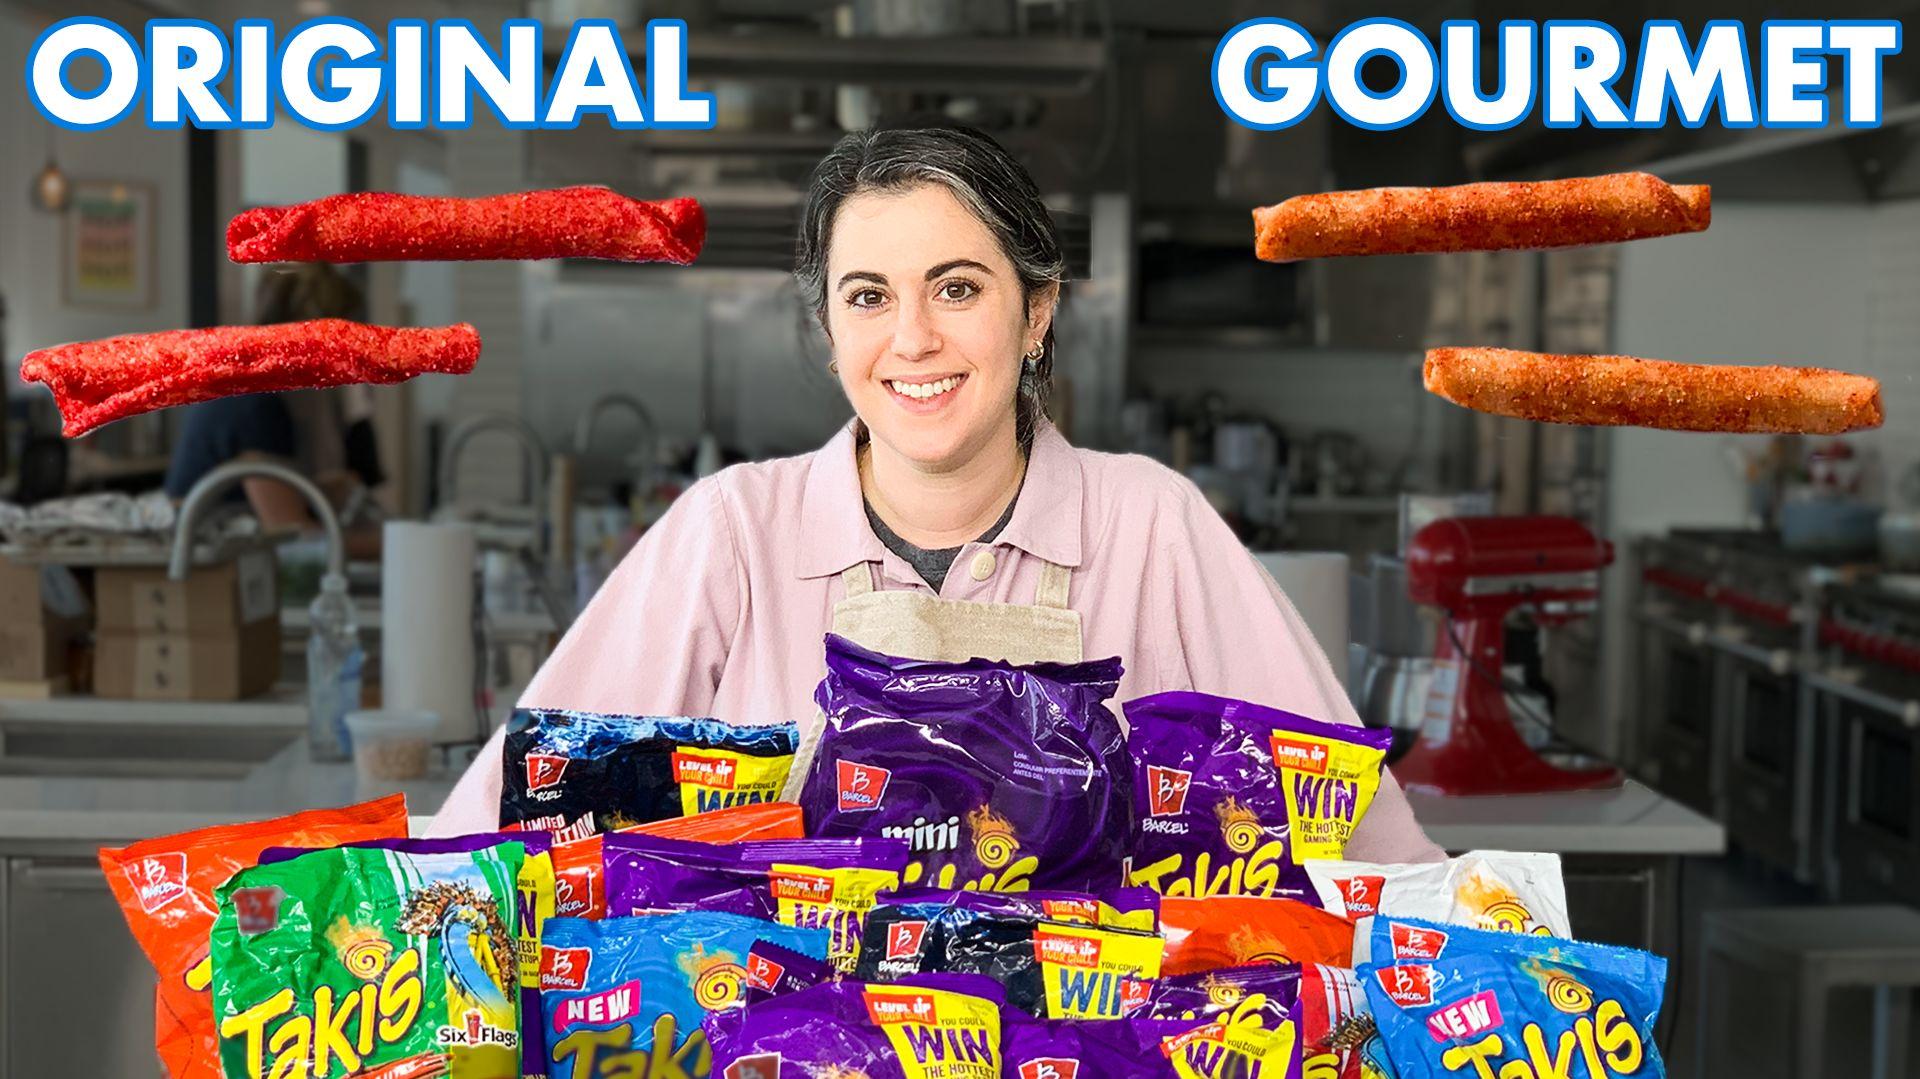 Watch Pastry Chef Attempts to Make Gourmet Takis Gourmet Makes